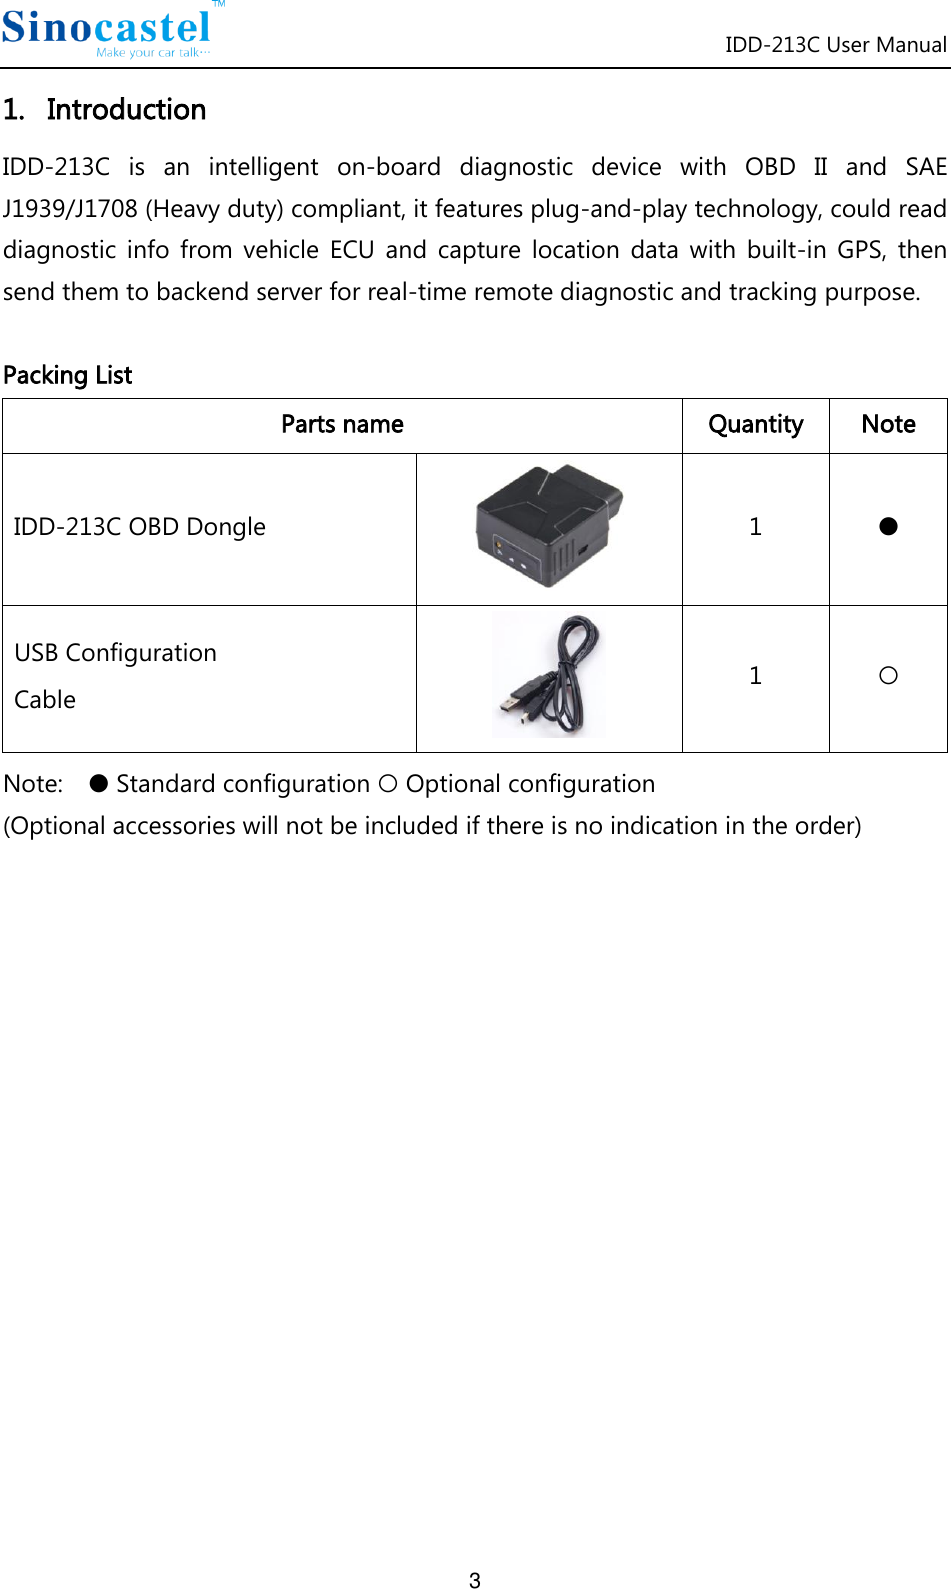 IDD-213C User Manual 3 1.   Introduction IDD-213C  is  an  intelligent  on-board  diagnostic  device  with  OBD  II  and  SAE J1939/J1708 (Heavy duty) compliant, it features plug-and-play technology, could read diagnostic  info  from  vehicle  ECU  and  capture  location  data  with  built-in  GPS,  then send them to backend server for real-time remote diagnostic and tracking purpose.  Packing List Parts name Quantity Note IDD-213C OBD Dongle  1 ● USB Configuration Cable    1 ○ Note:    ● Standard configuration ○ Optional configuration (Optional accessories will not be included if there is no indication in the order)                 